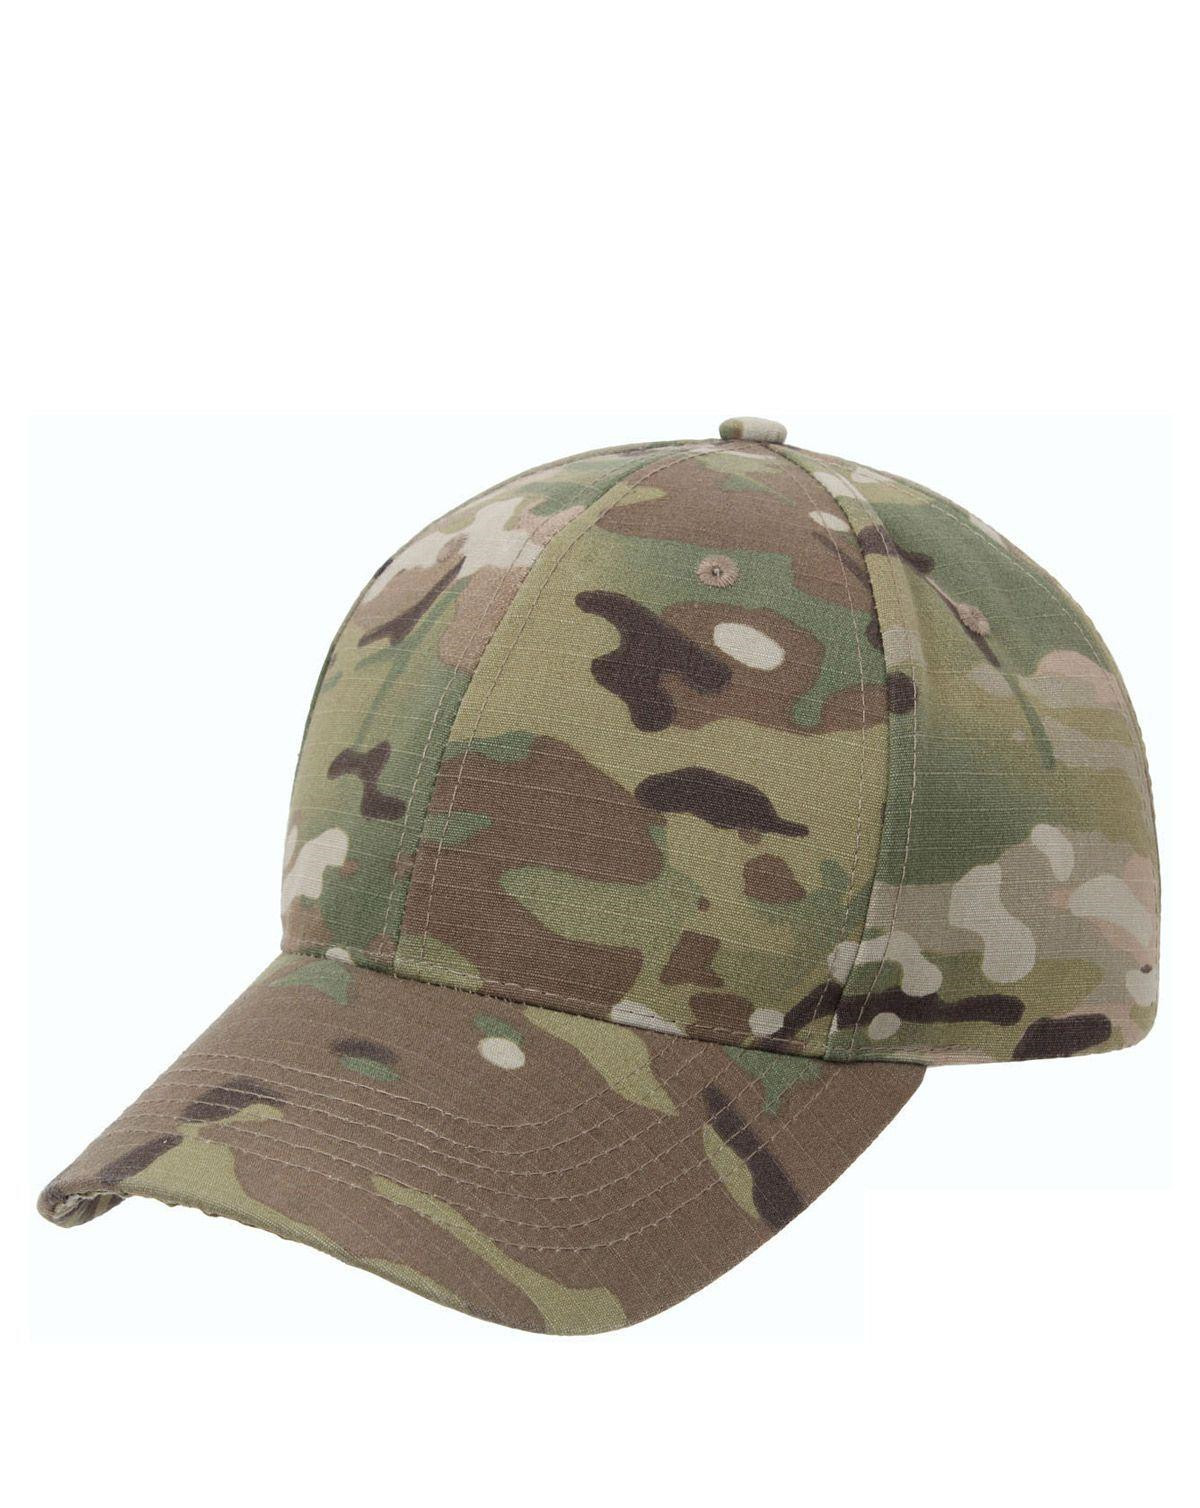 9: Rothco Low Profile Baseball Cap (Multicam, One Size)